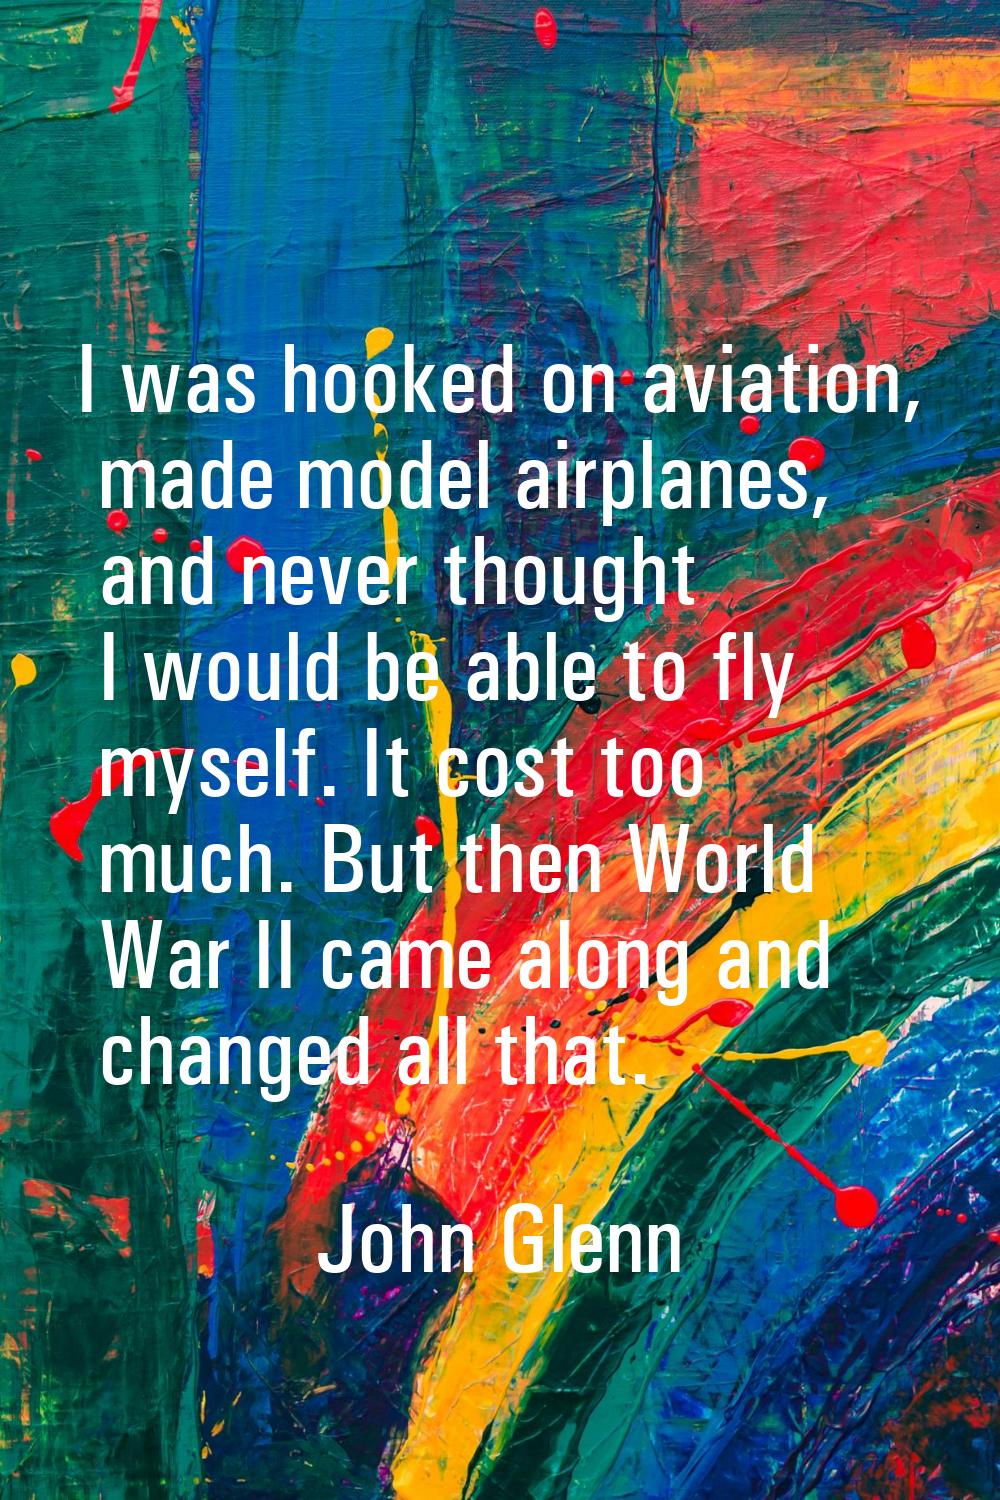 I was hooked on aviation, made model airplanes, and never thought I would be able to fly myself. It